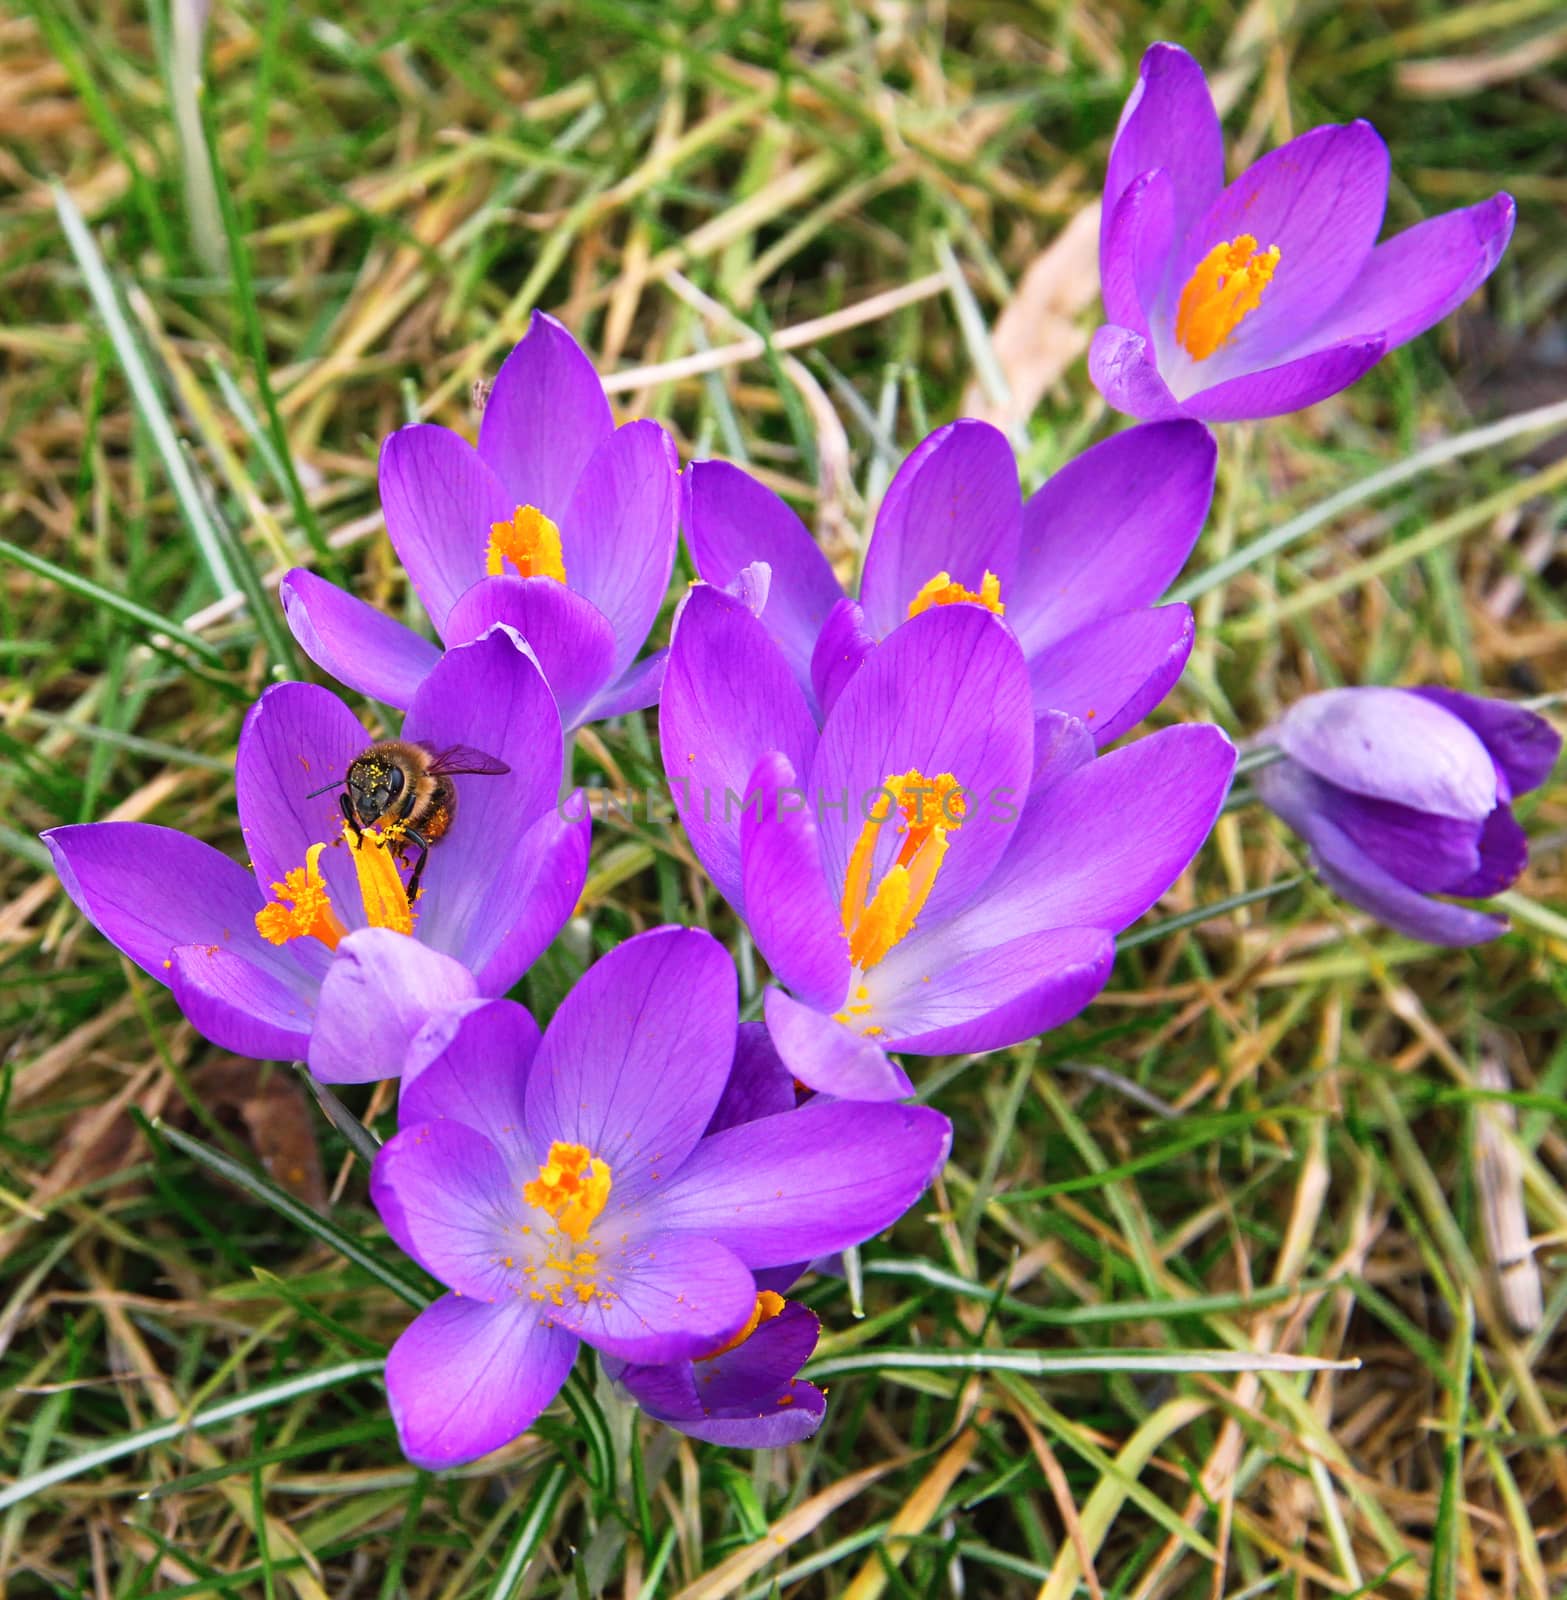 The bee collects nectar on one of the first spring flowers - a violet crocus